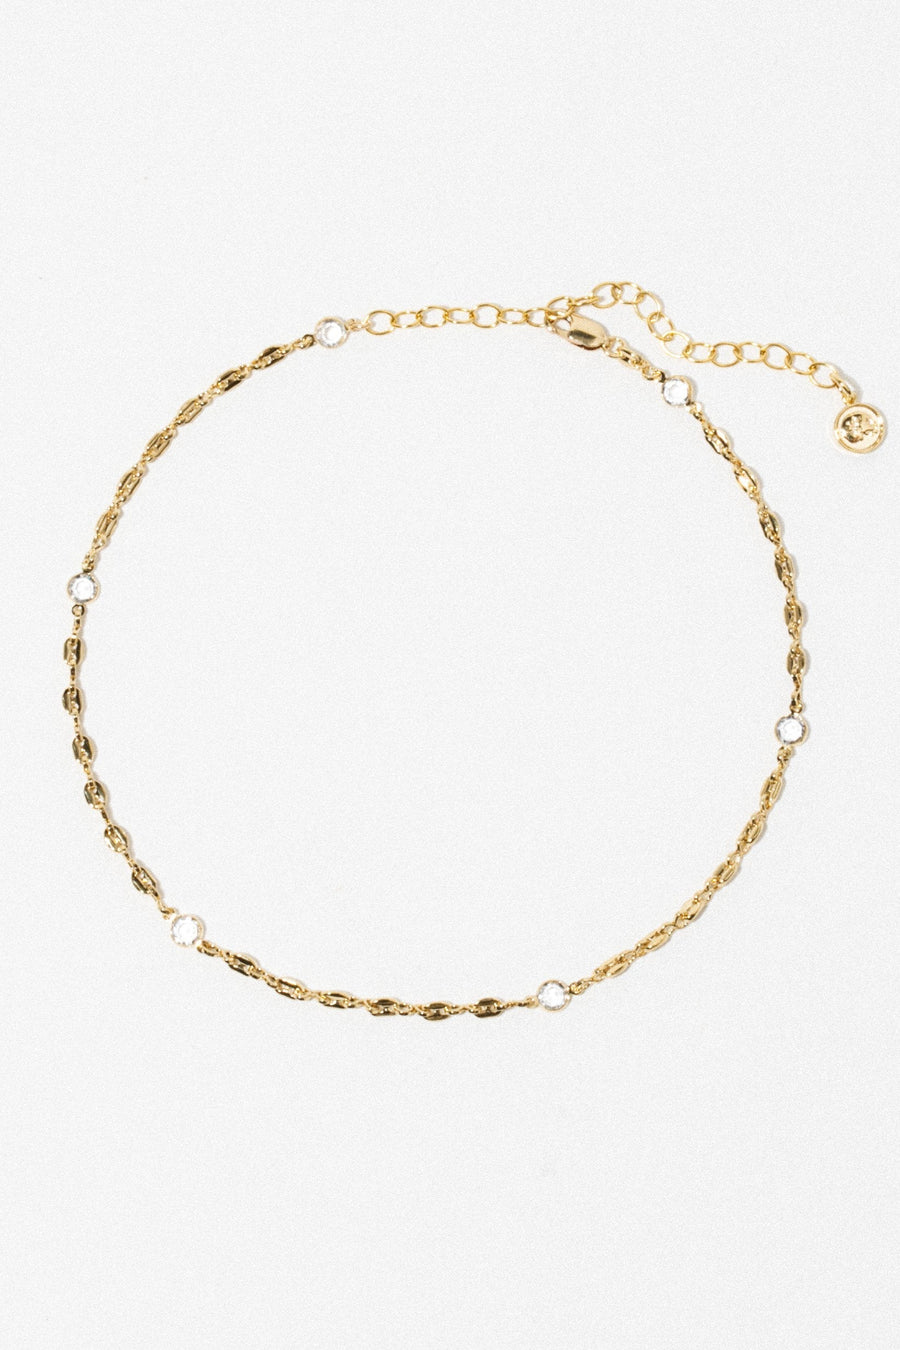 Goddess Jewelry Gold / 11 Inches The Tamara Necklace